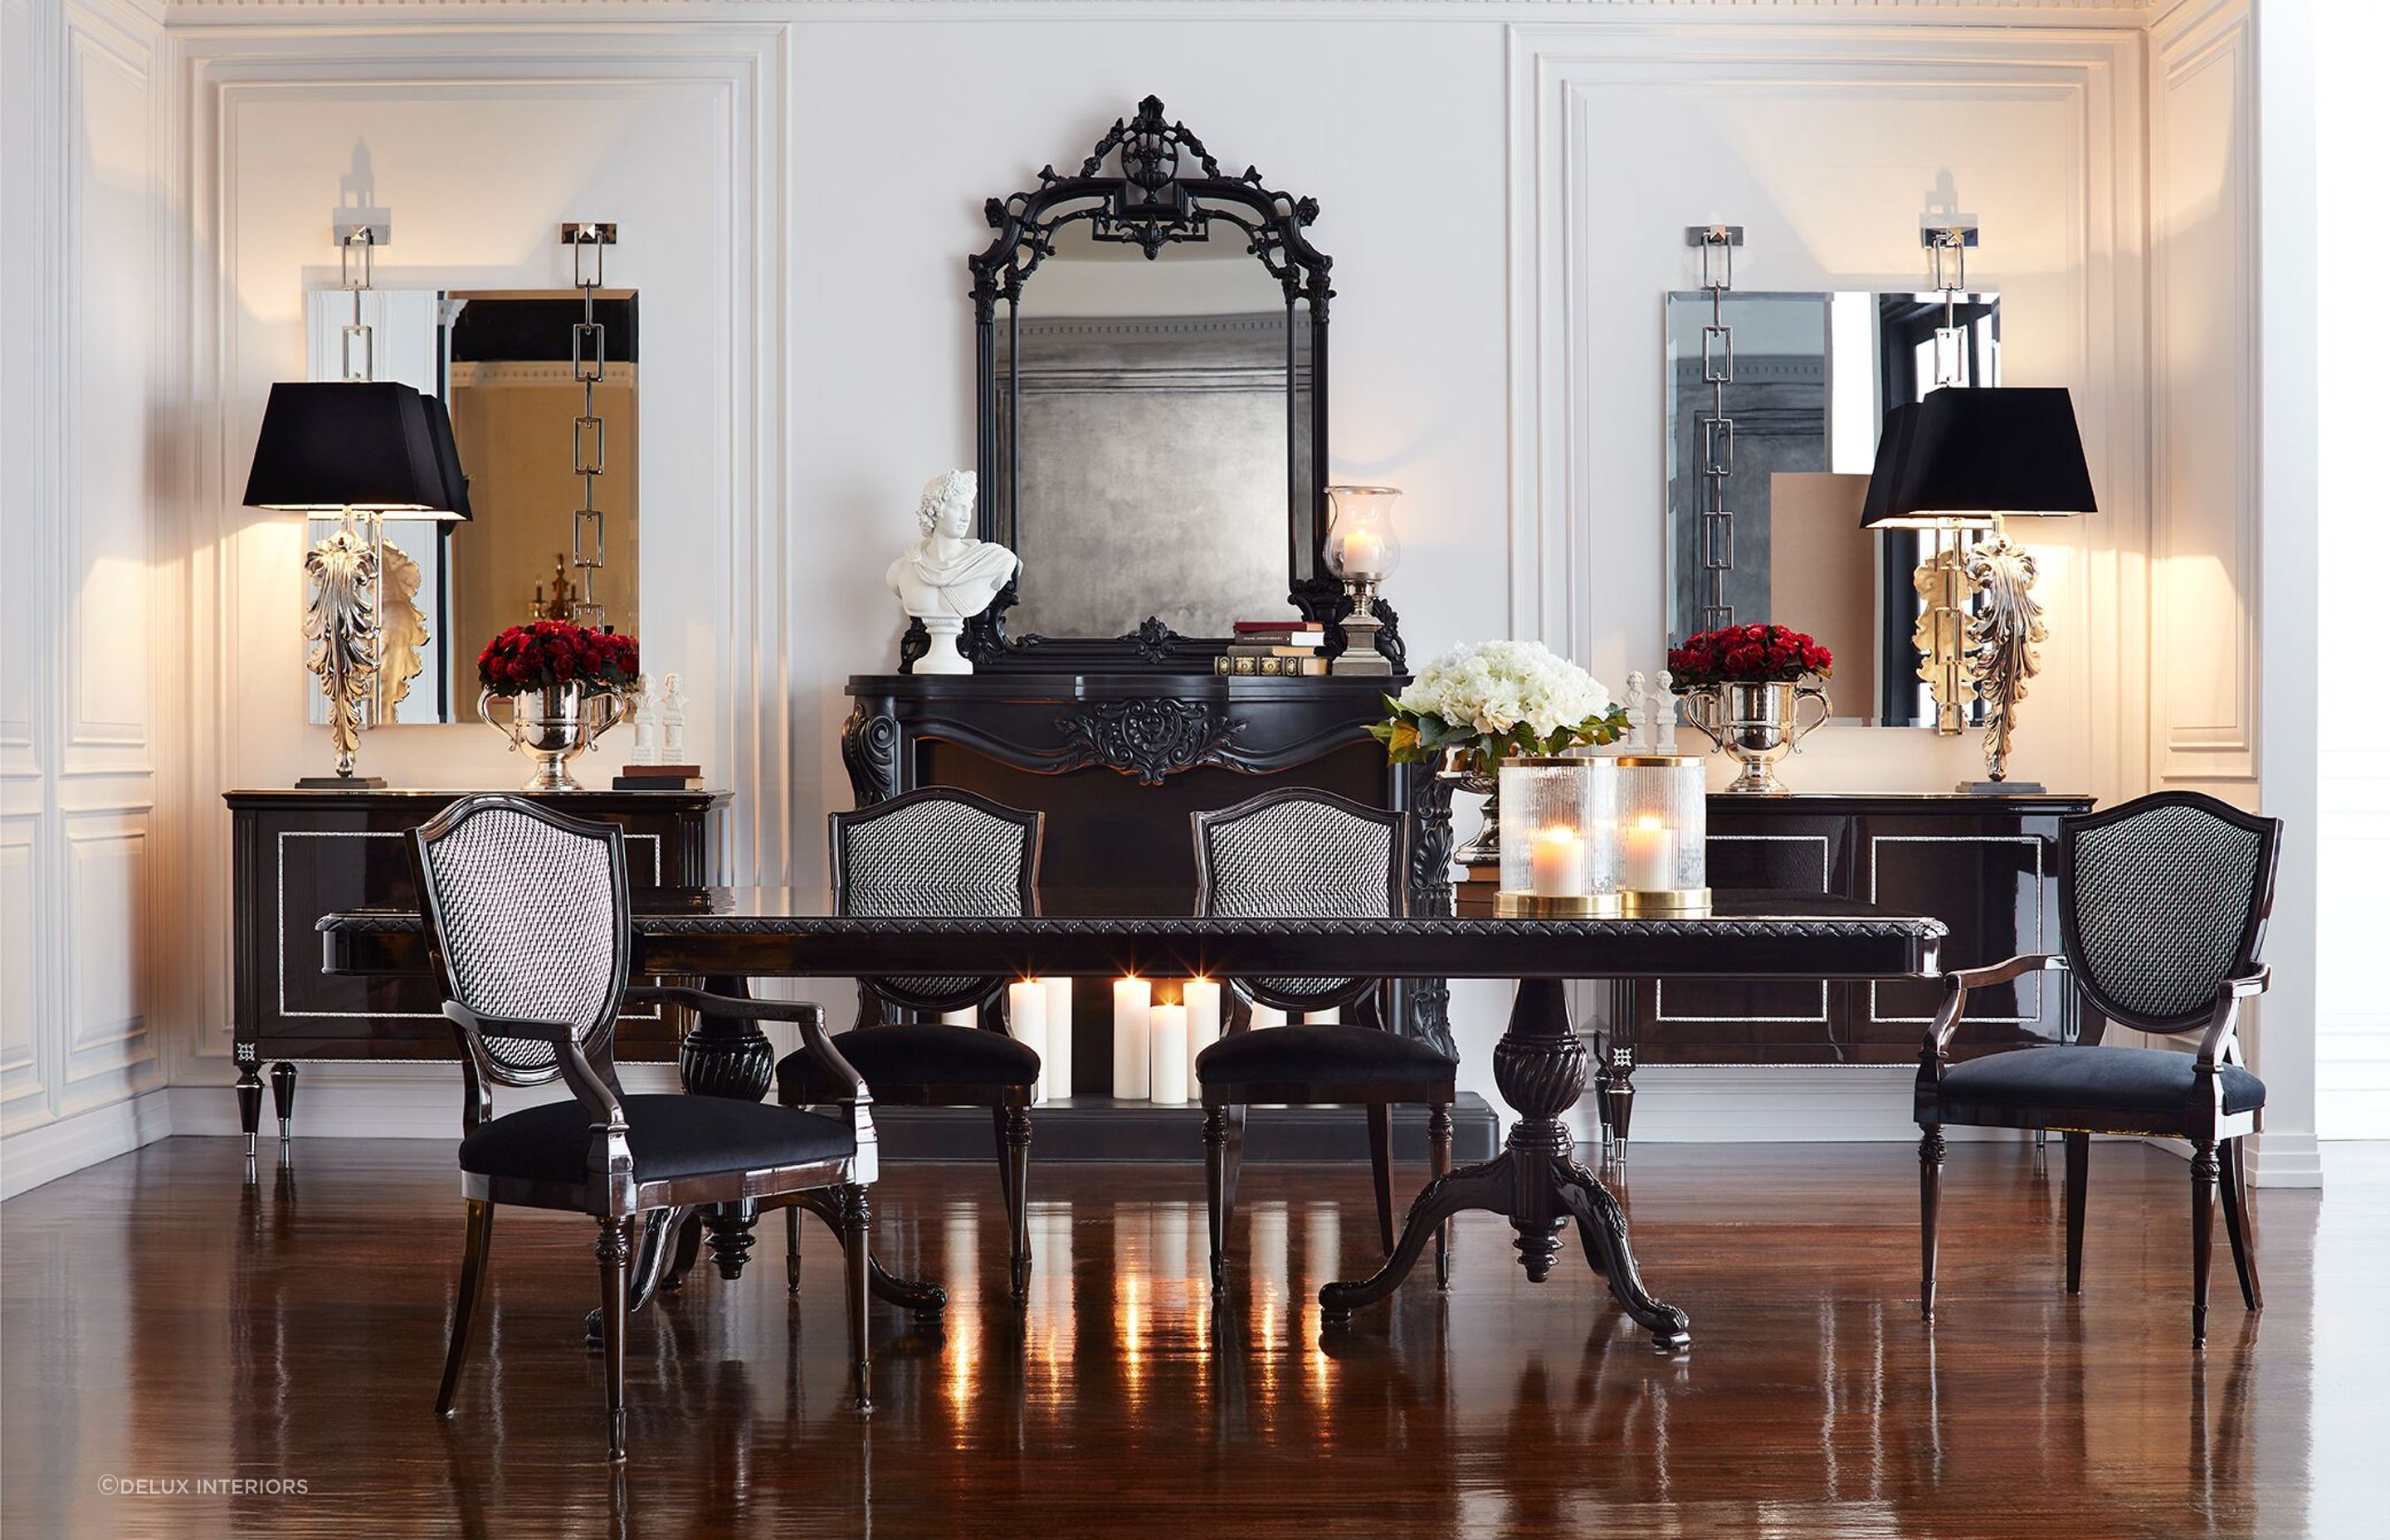 A dining table mirror, or three, can transform the experience of an evening, especially when paired with an impeccable furnishing like the London Dining Table.